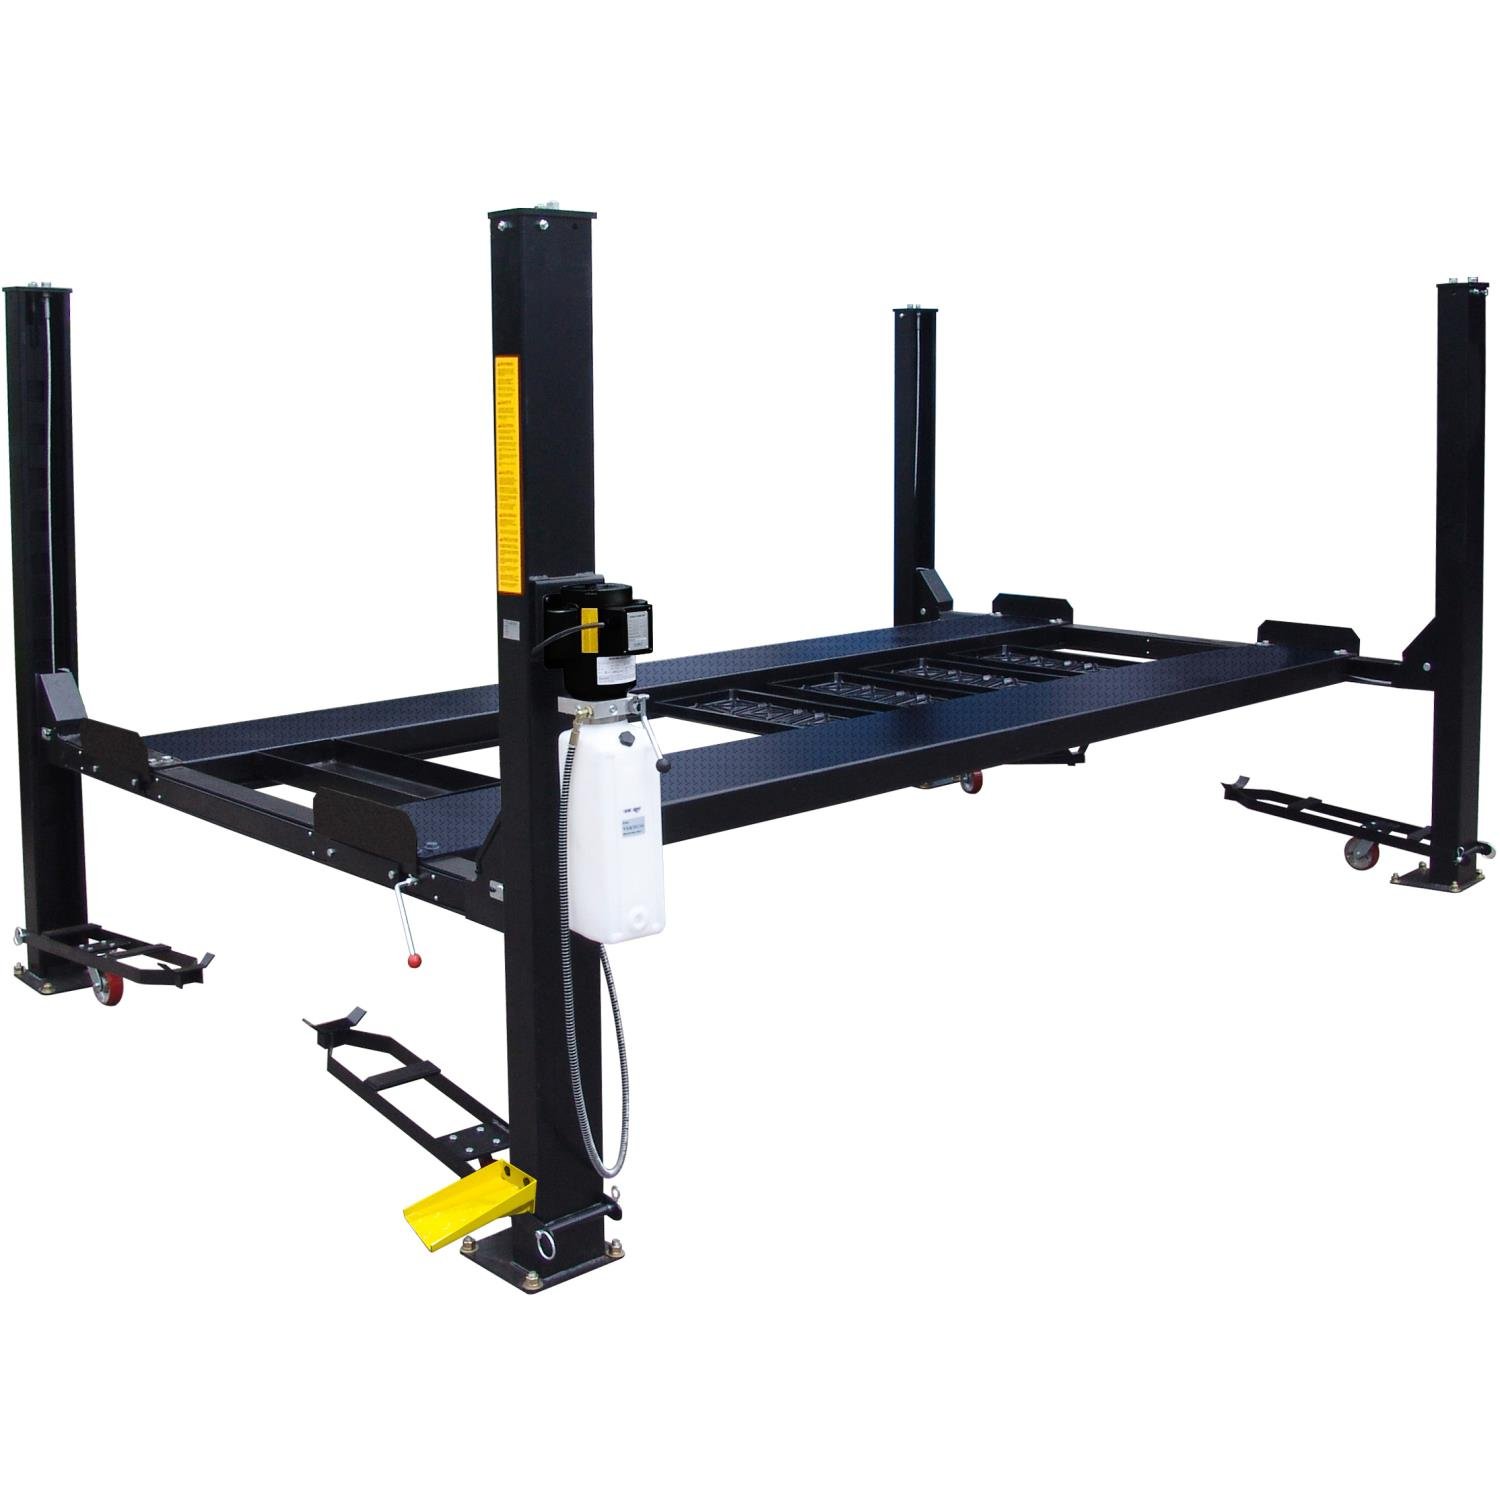 4-Post Automotive Deluxe Extended Storage Lift [9,000 lb.